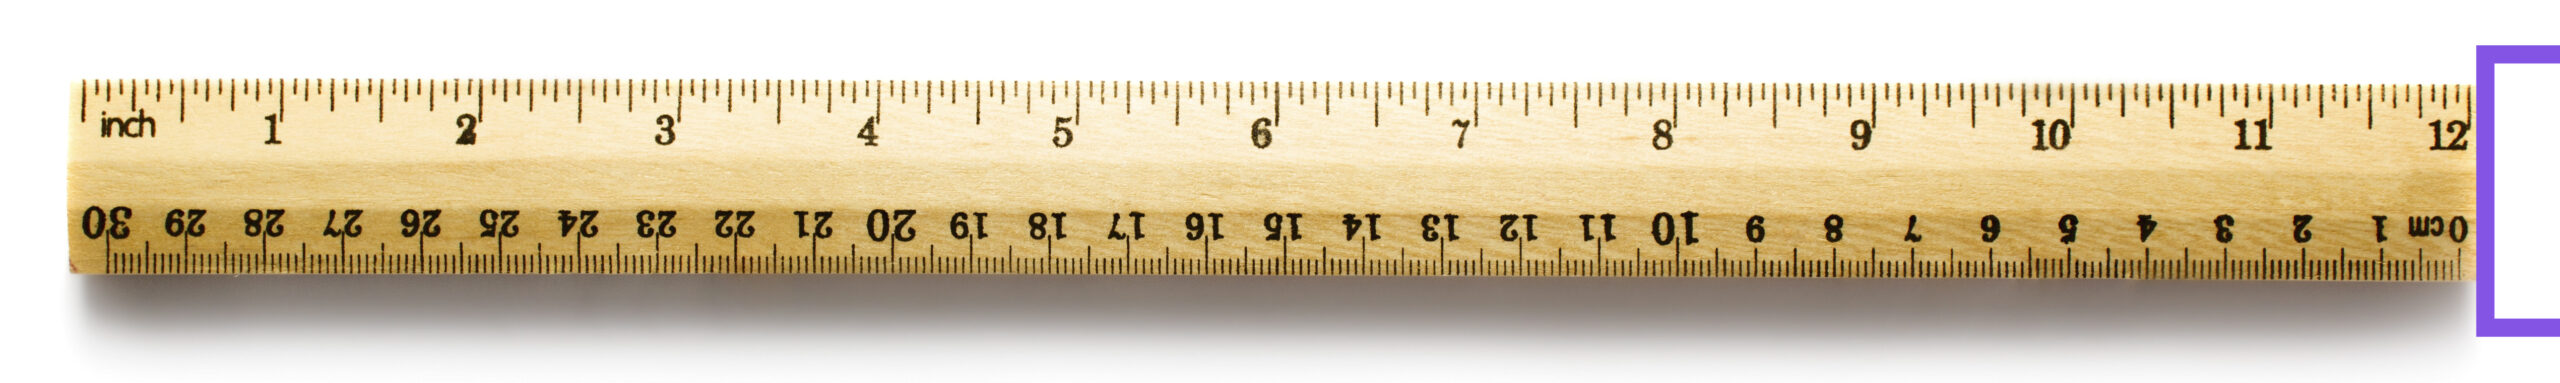 a ruler with 17 inches noted